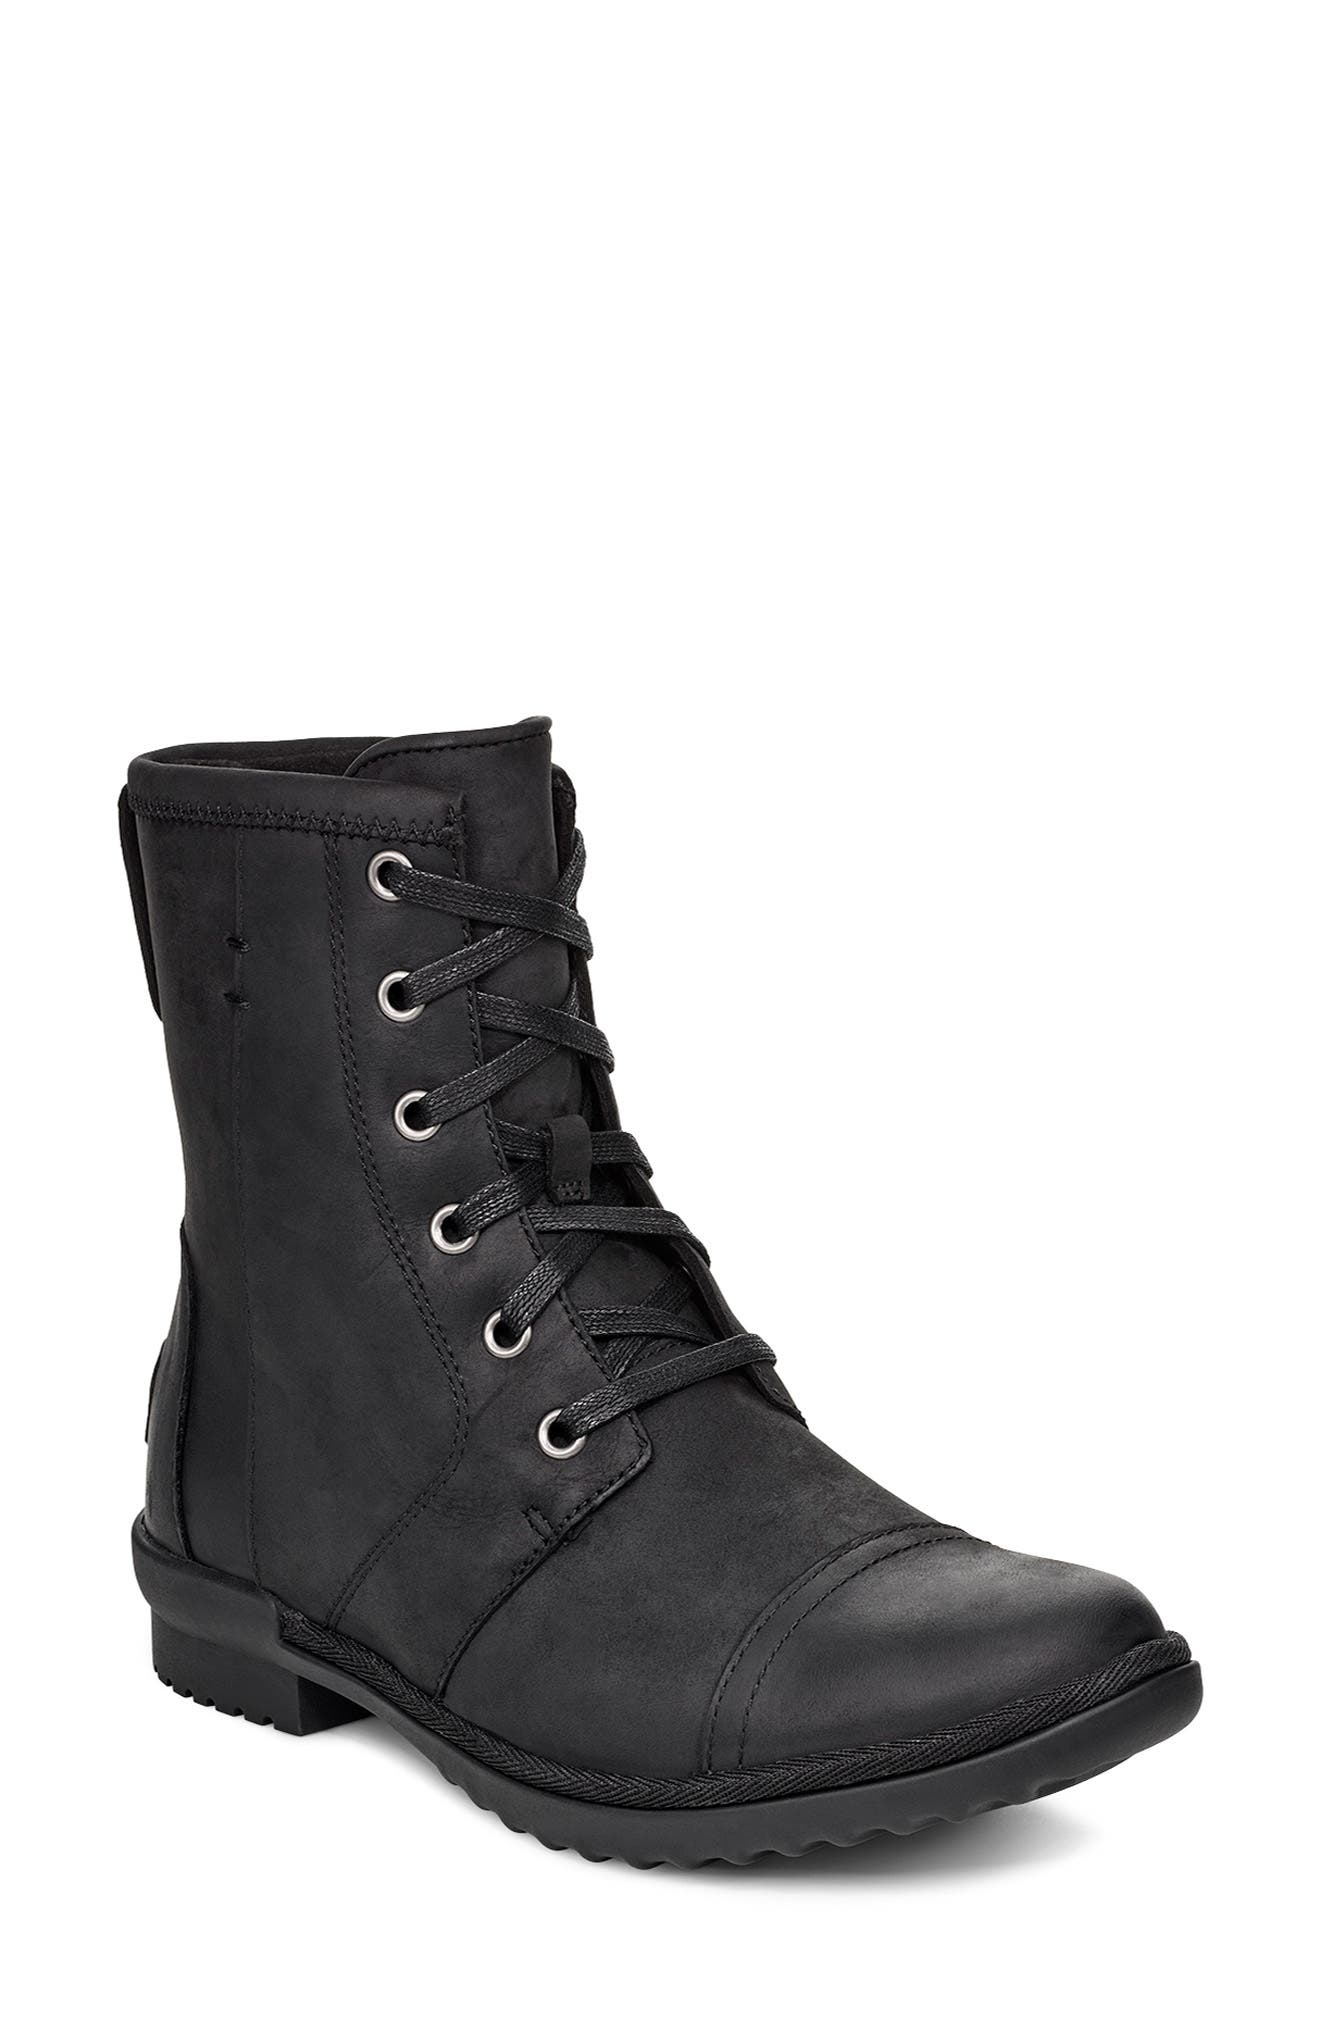 uggs lace up boots